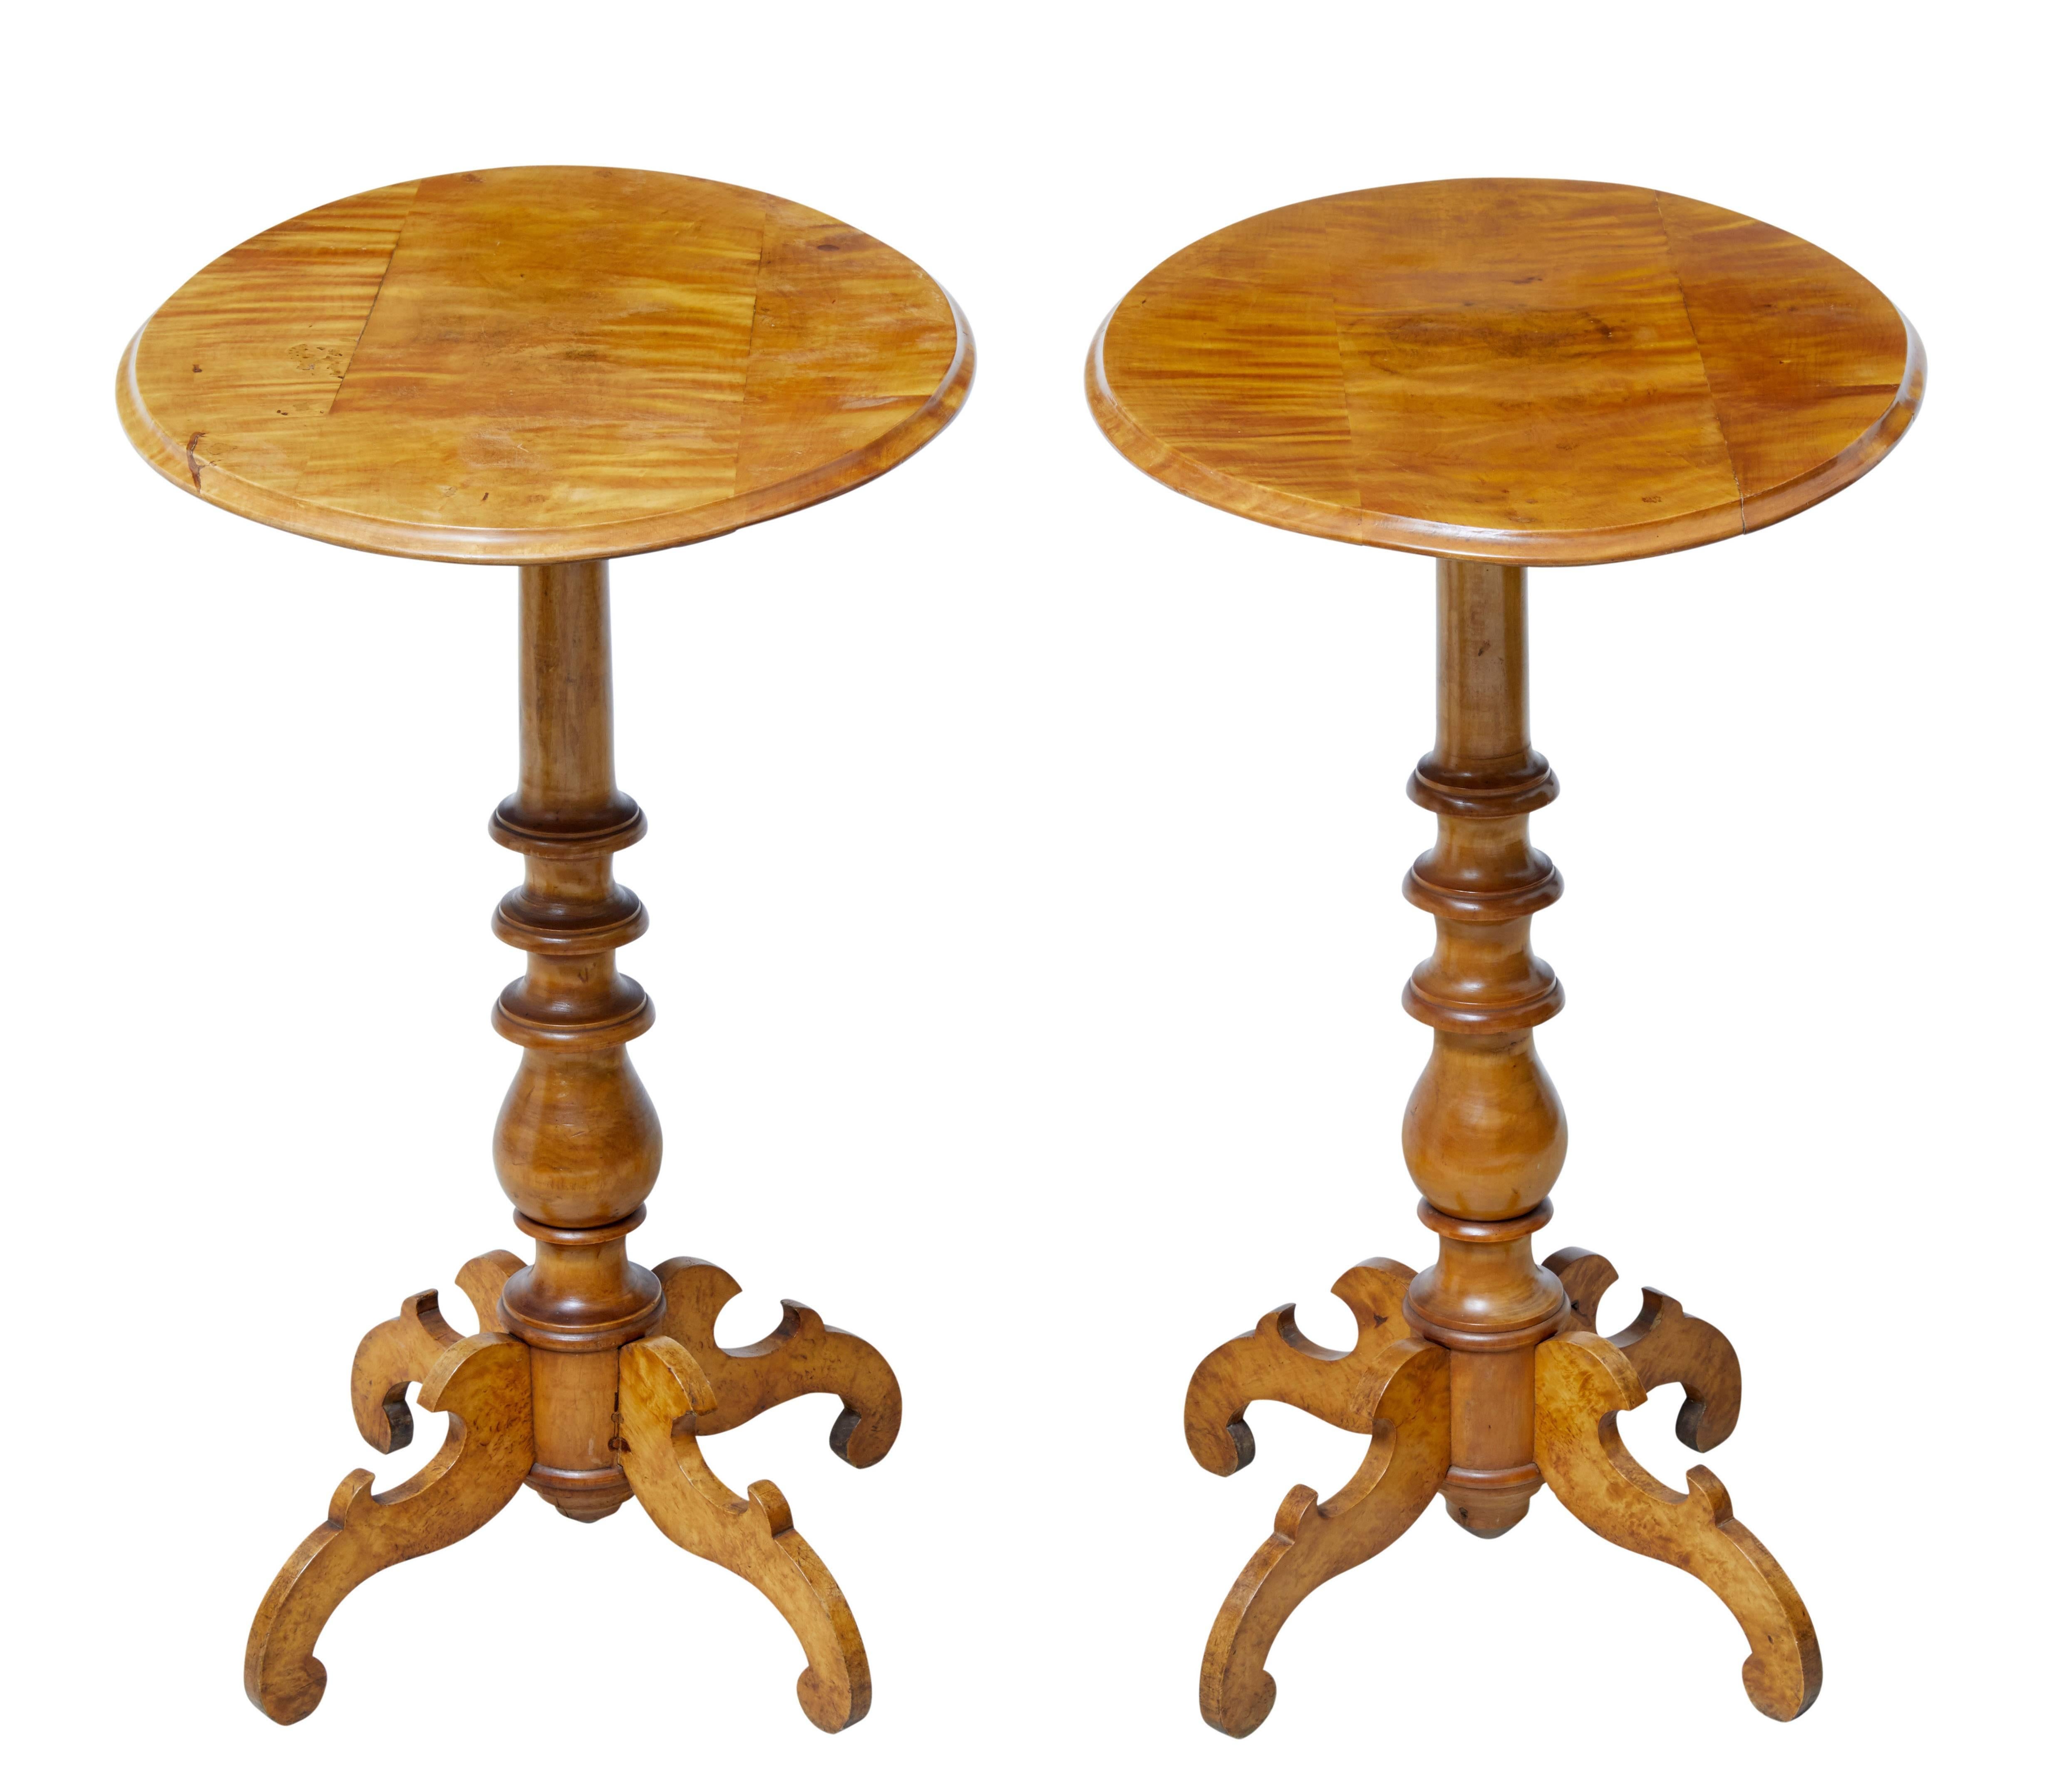 Fine pair of oval top Swedish birch occasional tables, circa 1890.

Elegant pair of occasional tables with multiple uses. Good rich birch color.

Oval tops with turned stem, standing on four scrolled legs.

Small area of fill to one top which